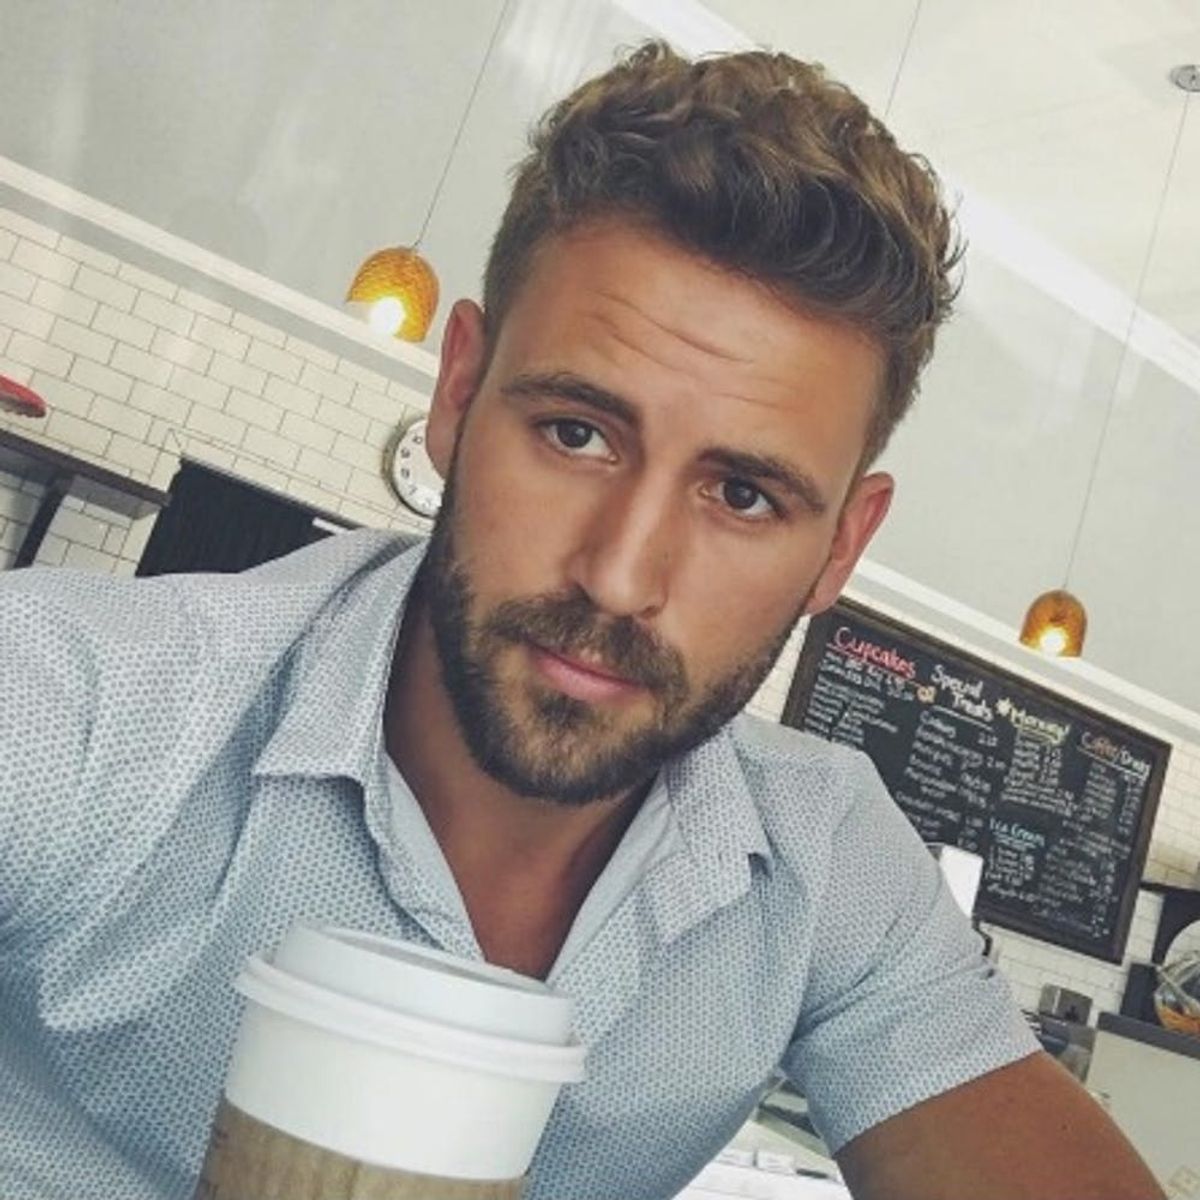 OMG: The Bachelor’s Nick Viall May Already Be Engaged